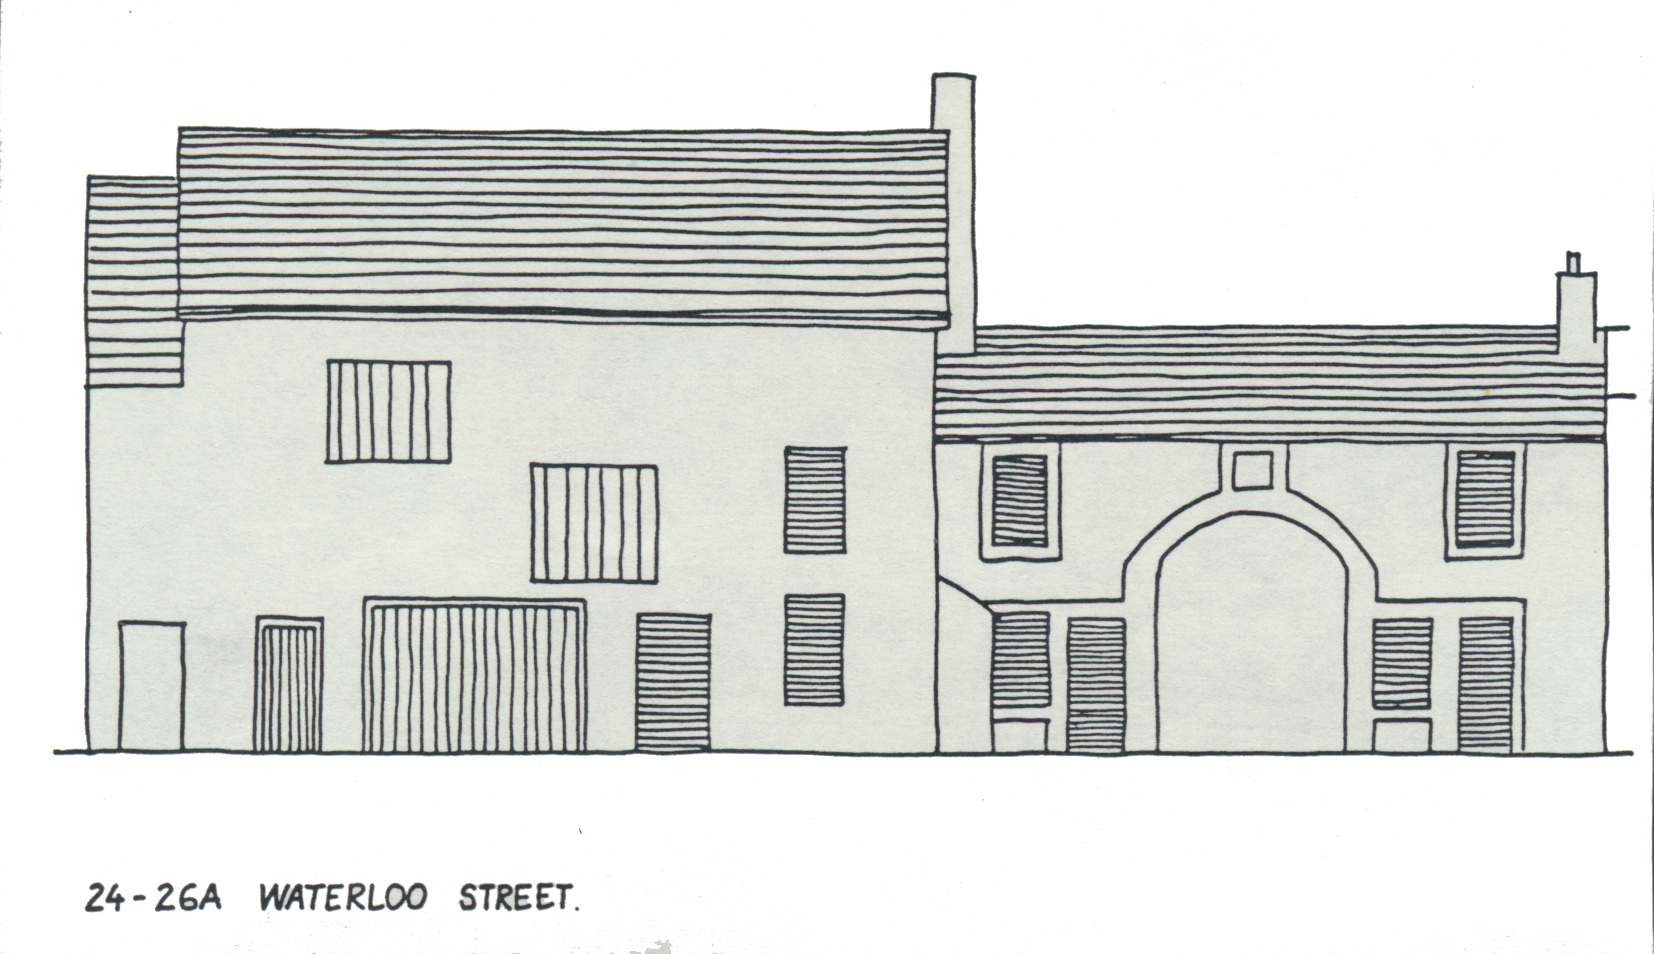 Waterloo Street 24 26A front elevation 1989 drawing